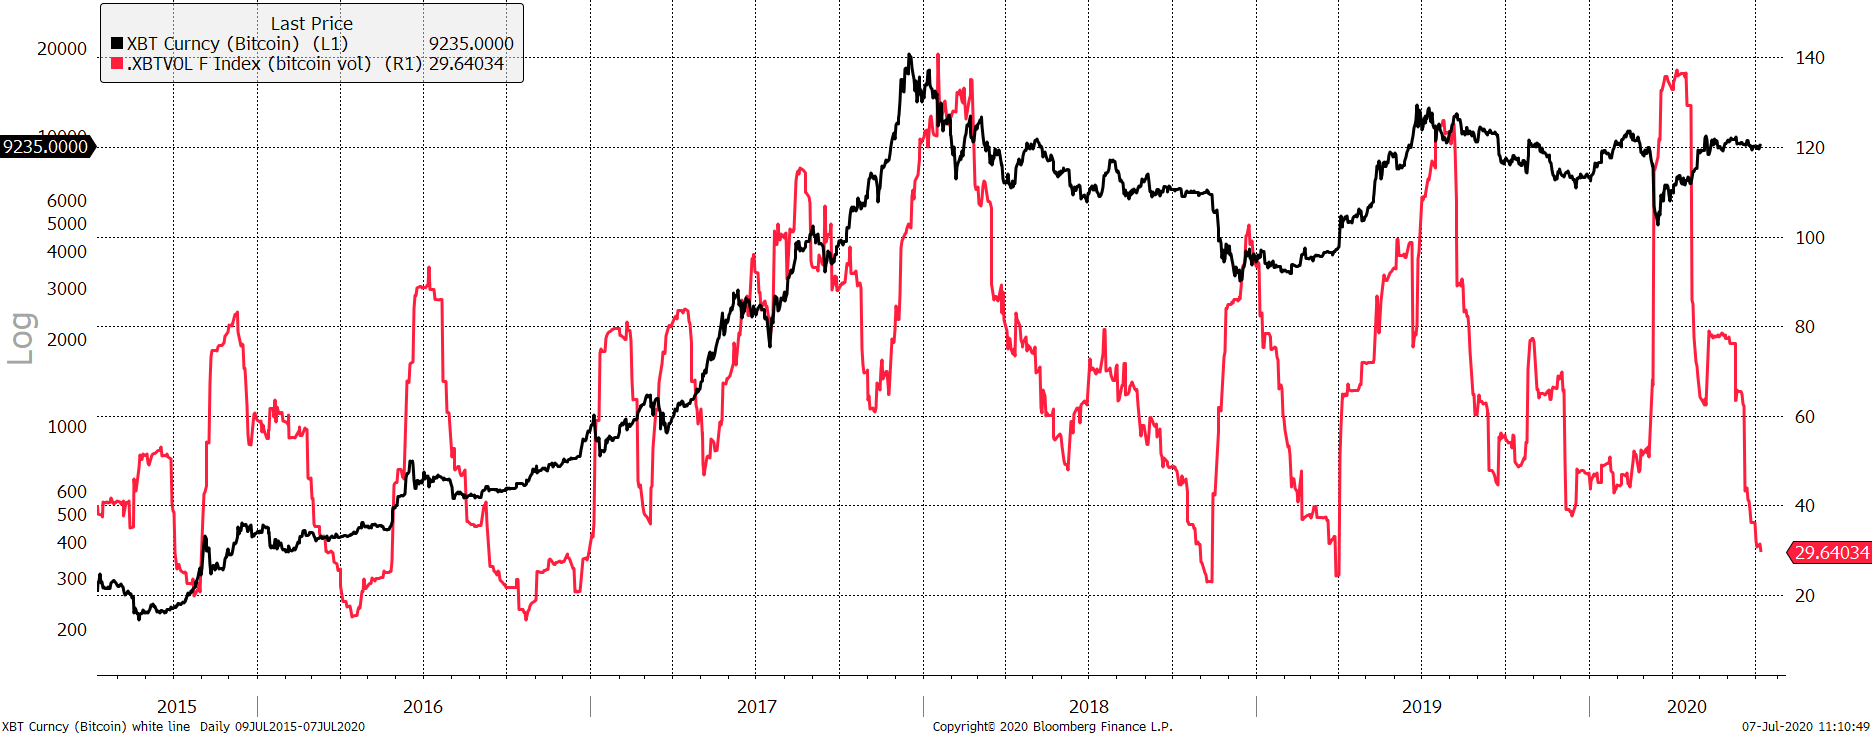 Source: Blomberg. Bitcoin in USD (black $ Log LHS), 30 day realised volatility (red % RHS) since 2015.